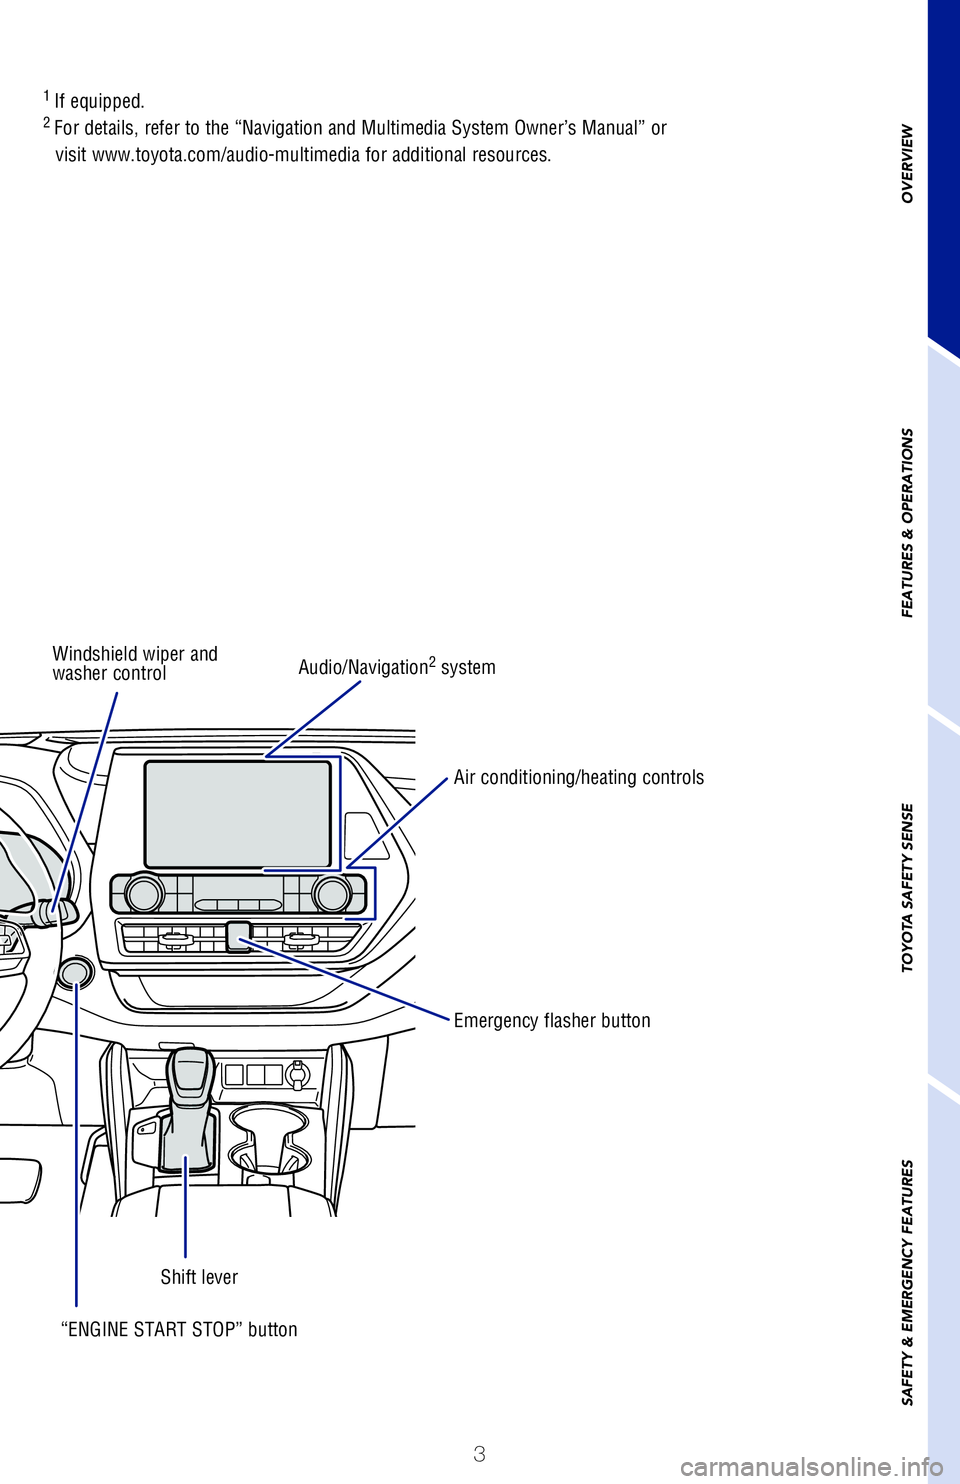 TOYOTA HIGHLANDER 2020  Owners Manual (in English) 3
OVERVIEW
FEATURES & OPERATIONS
TOYOTA SAFETY SENSE
SAFETY & EMERGENCY FEATURES
Tilt and telescopic steering 
lock release lever   
(below the steering wheel)
Windshield wiper and 
washer control
“